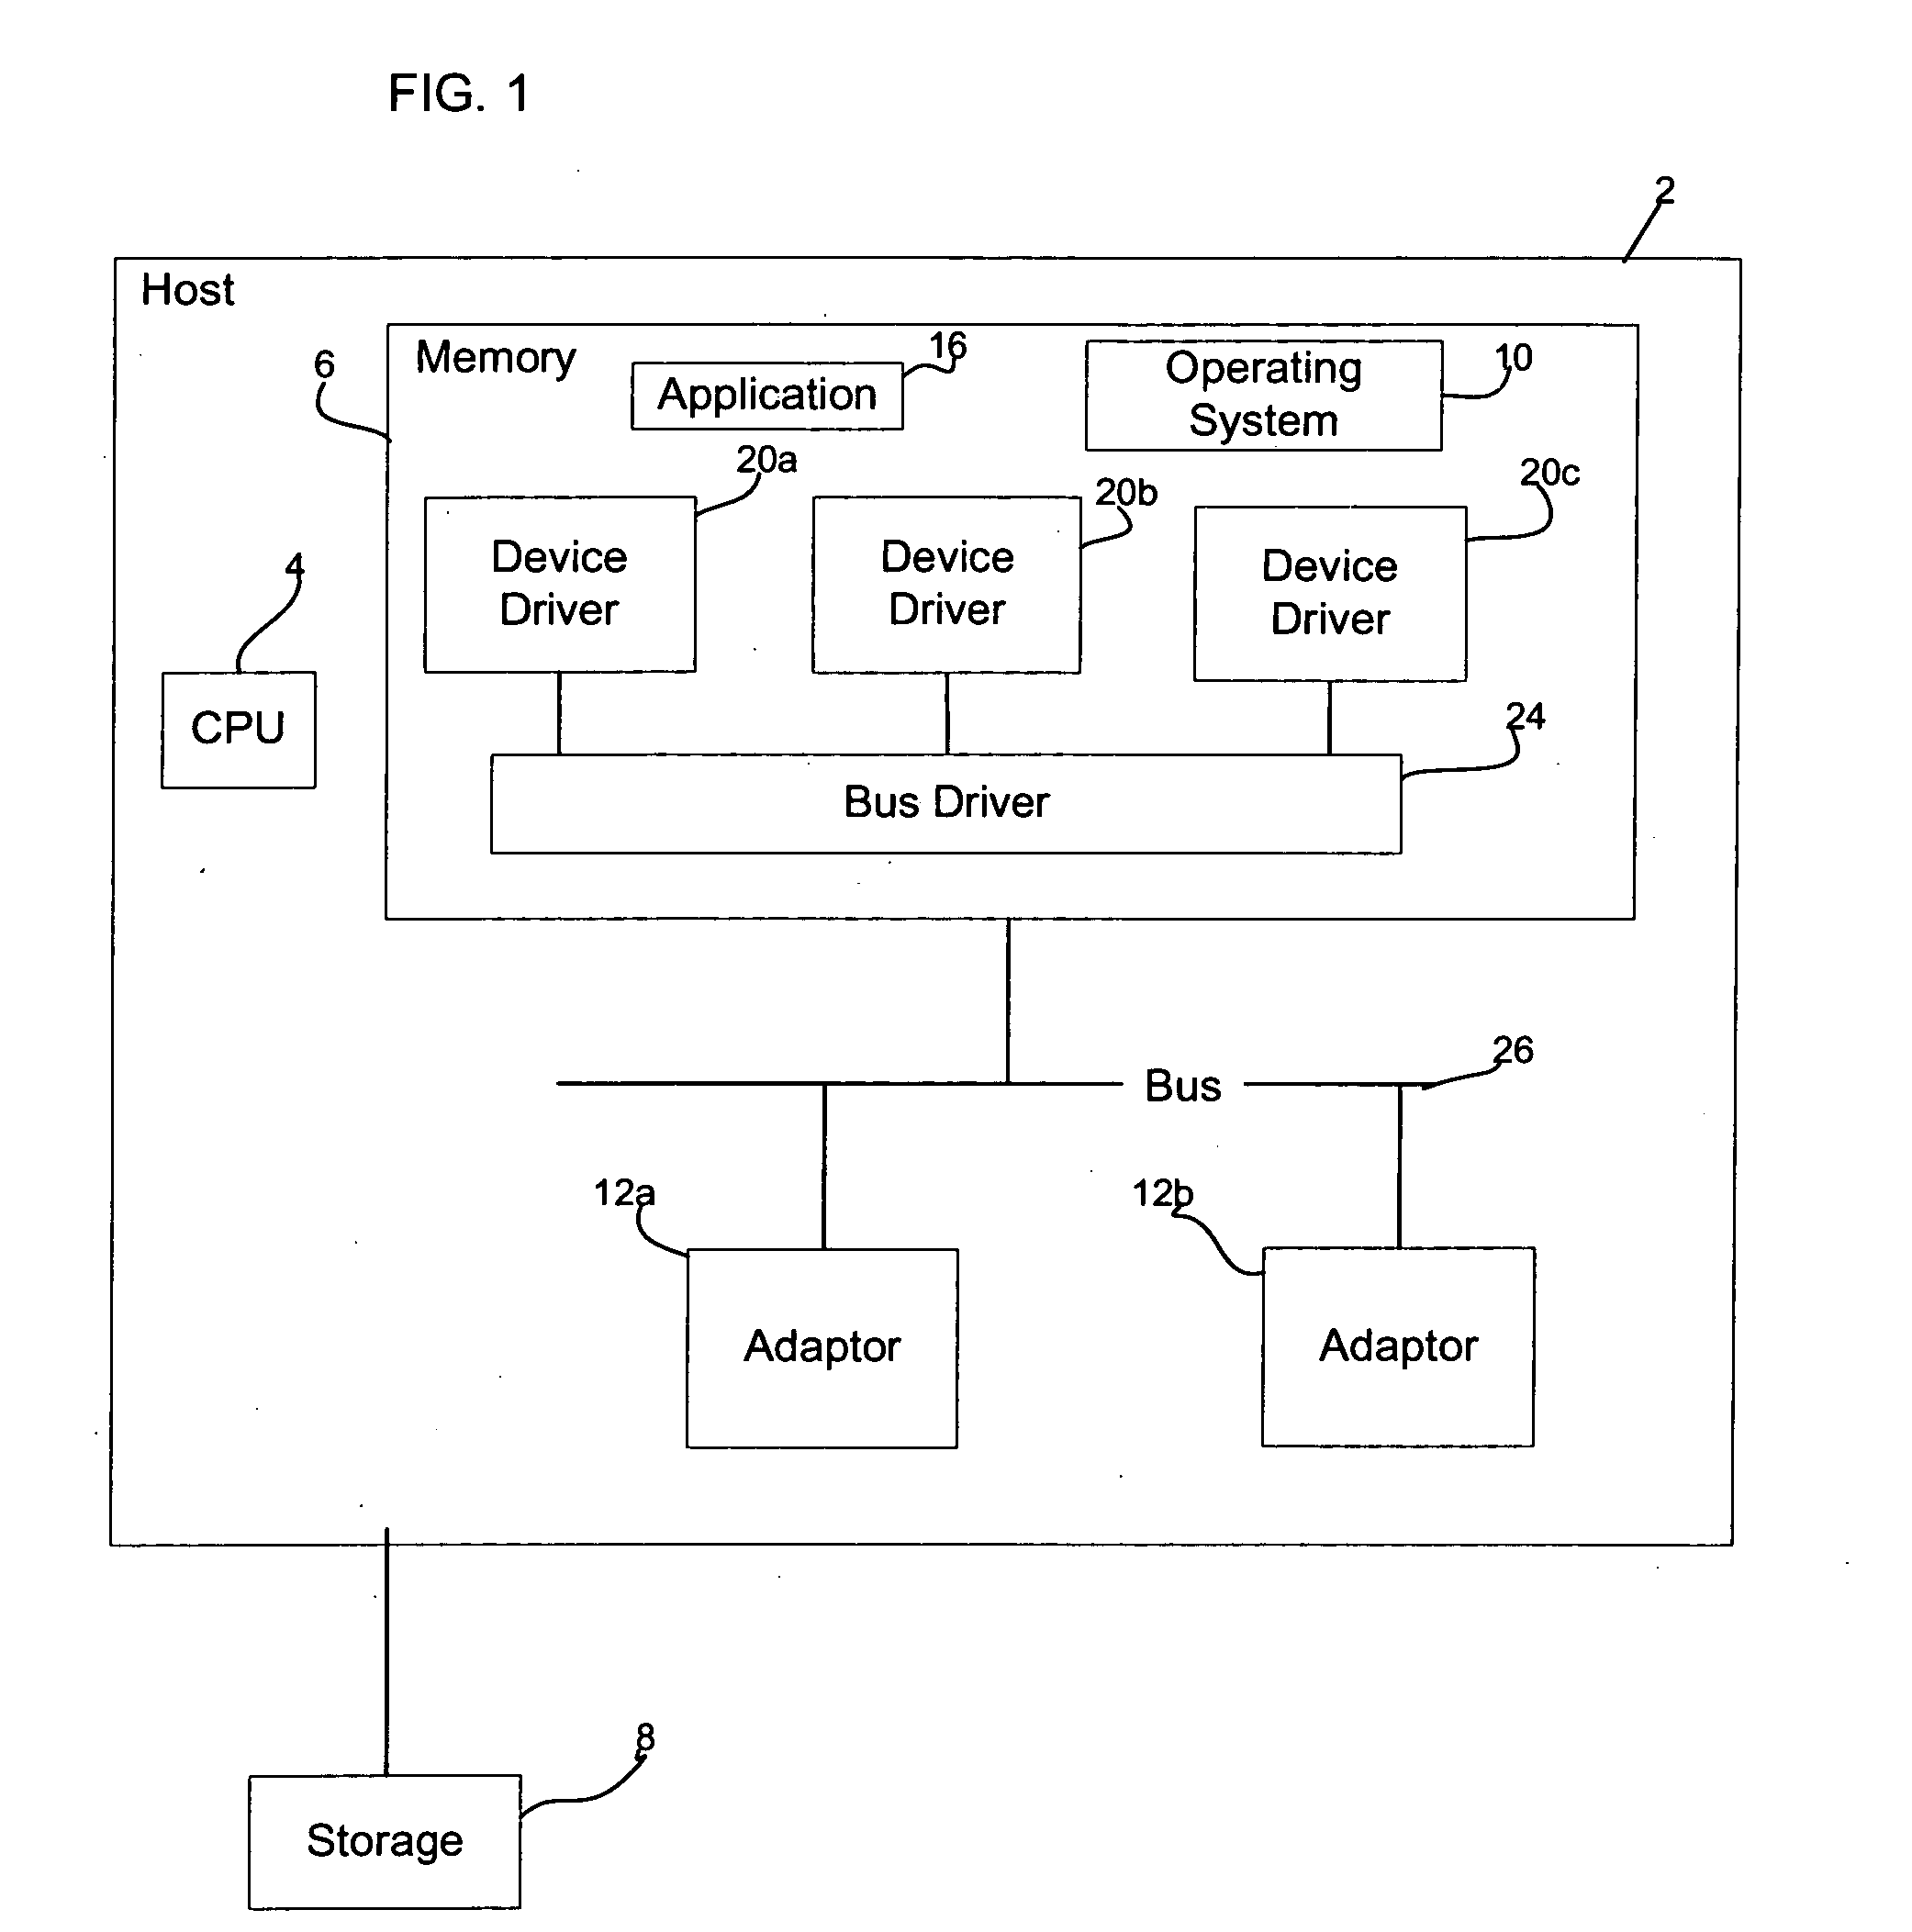 Multiple interfaces in a storage enclosure